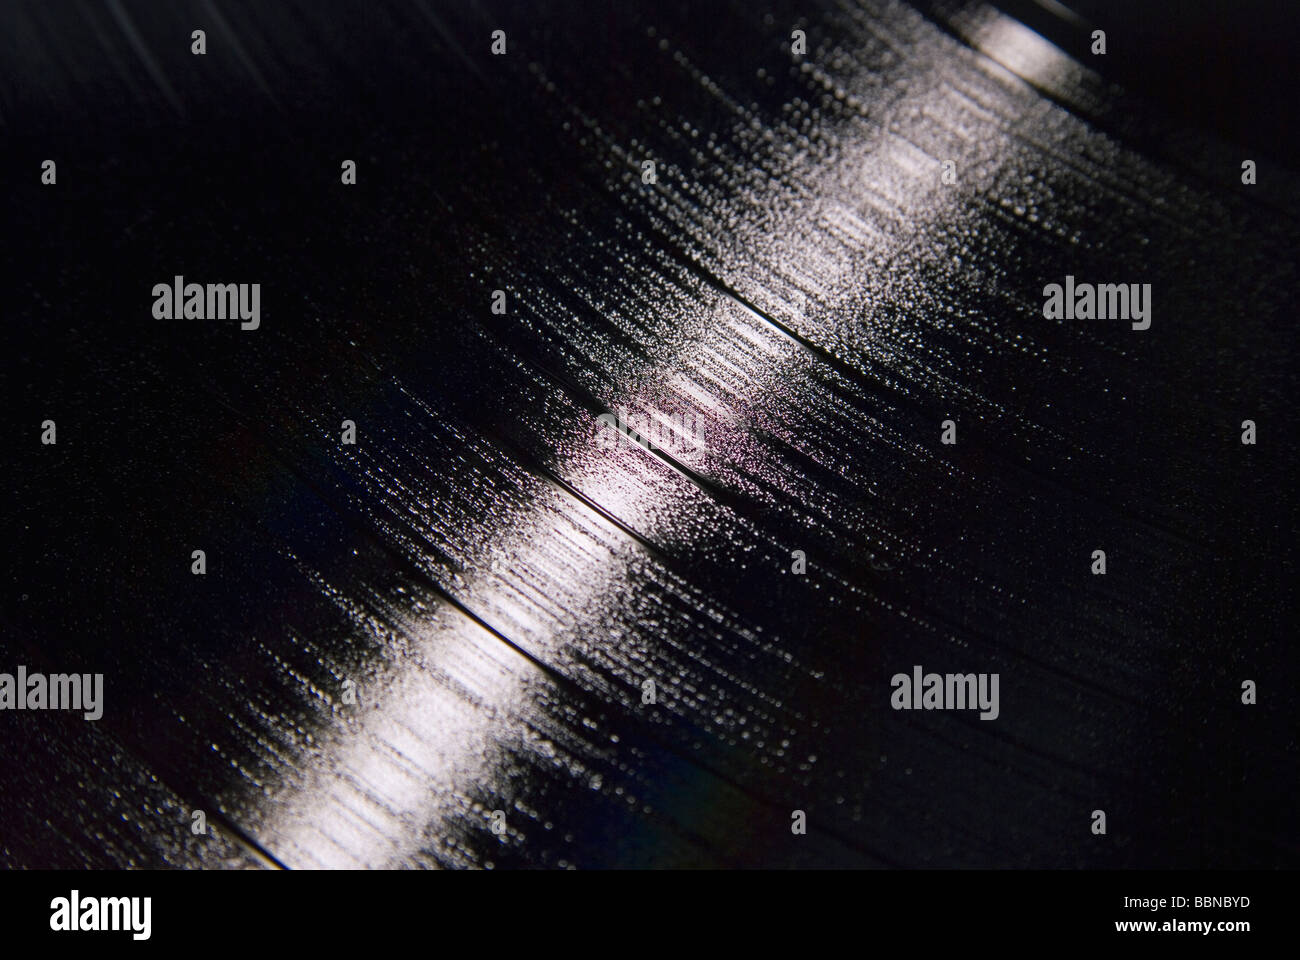 Close up grooves on a vinyl record Stock Photo